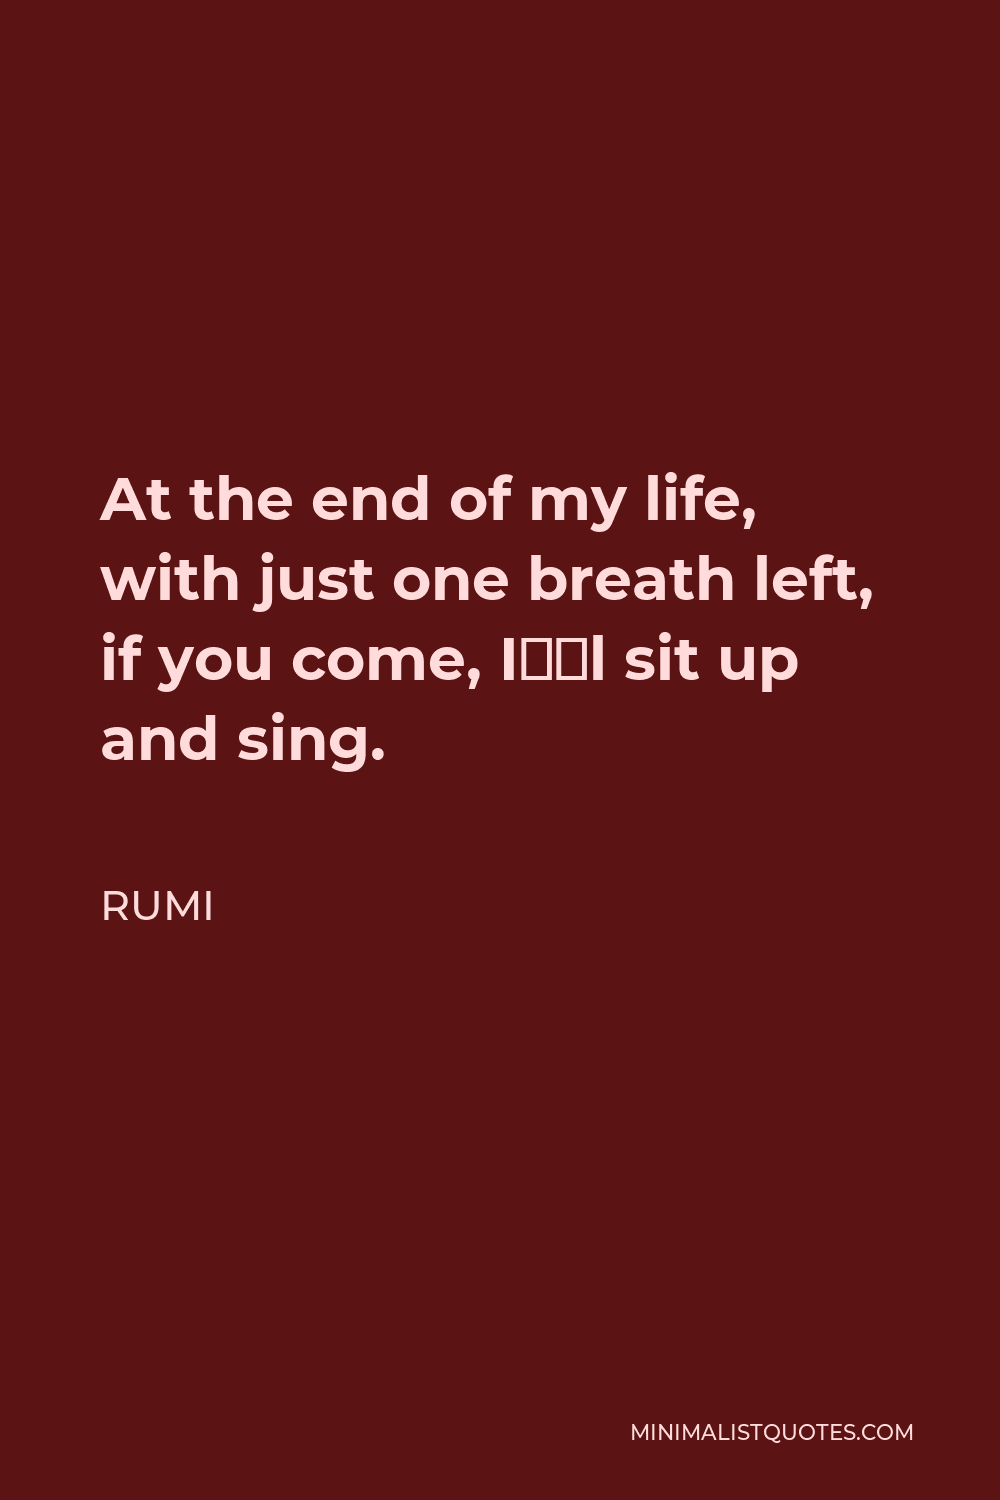 Rumi Quote - At the end of my life, with just one breath left, if you come, I’ll sit up and sing.